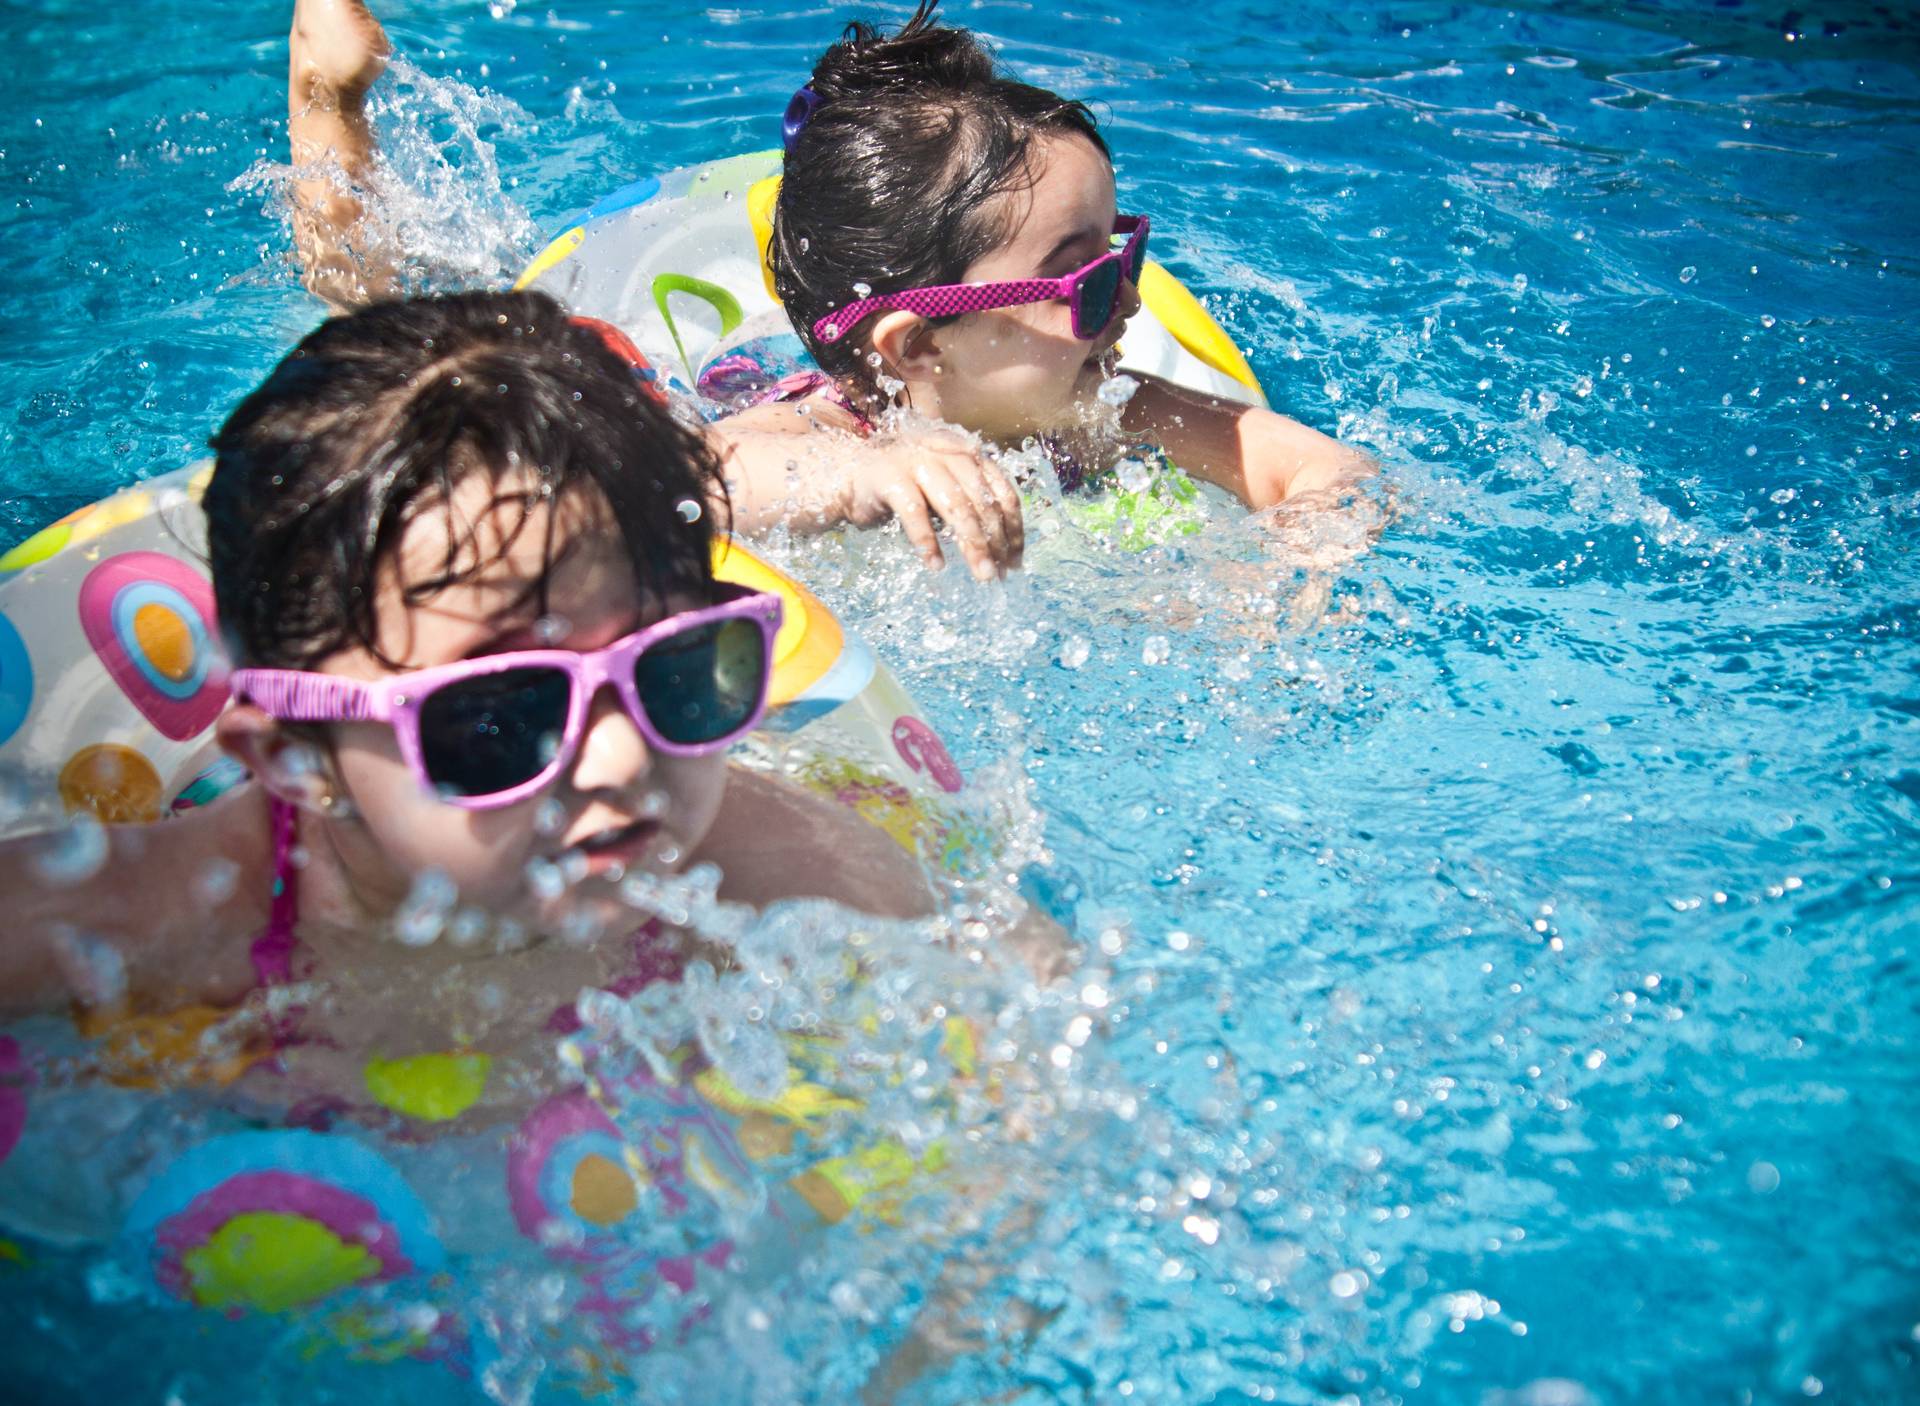 Children in the pool, play is an important part of a luxury vacation with kids